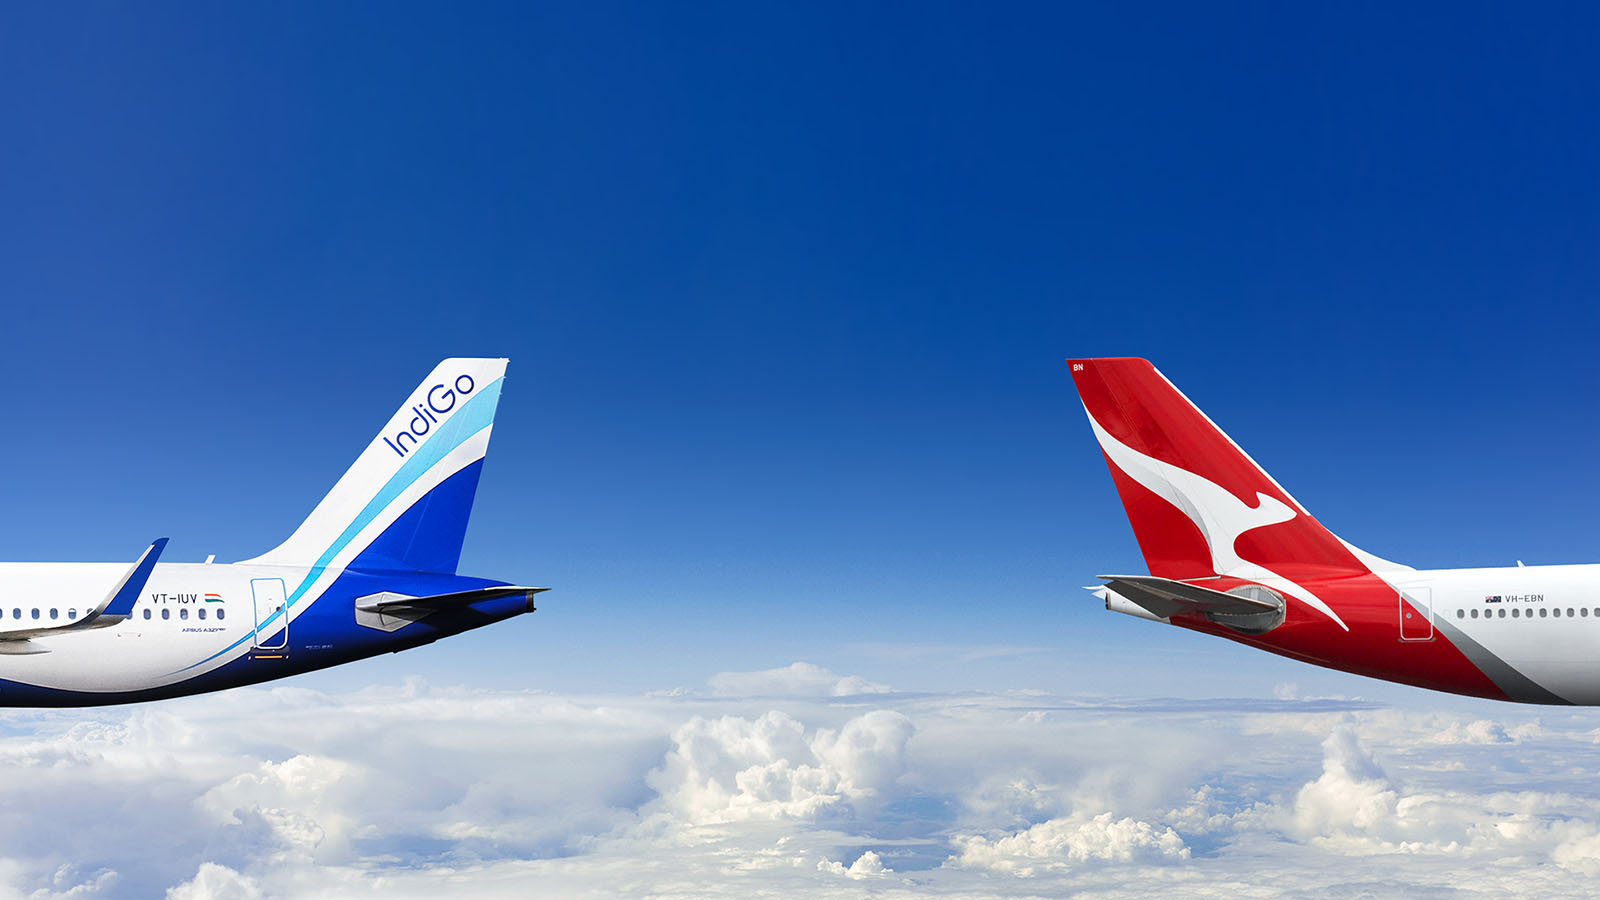 Qantas and IndiGo will become airline partners